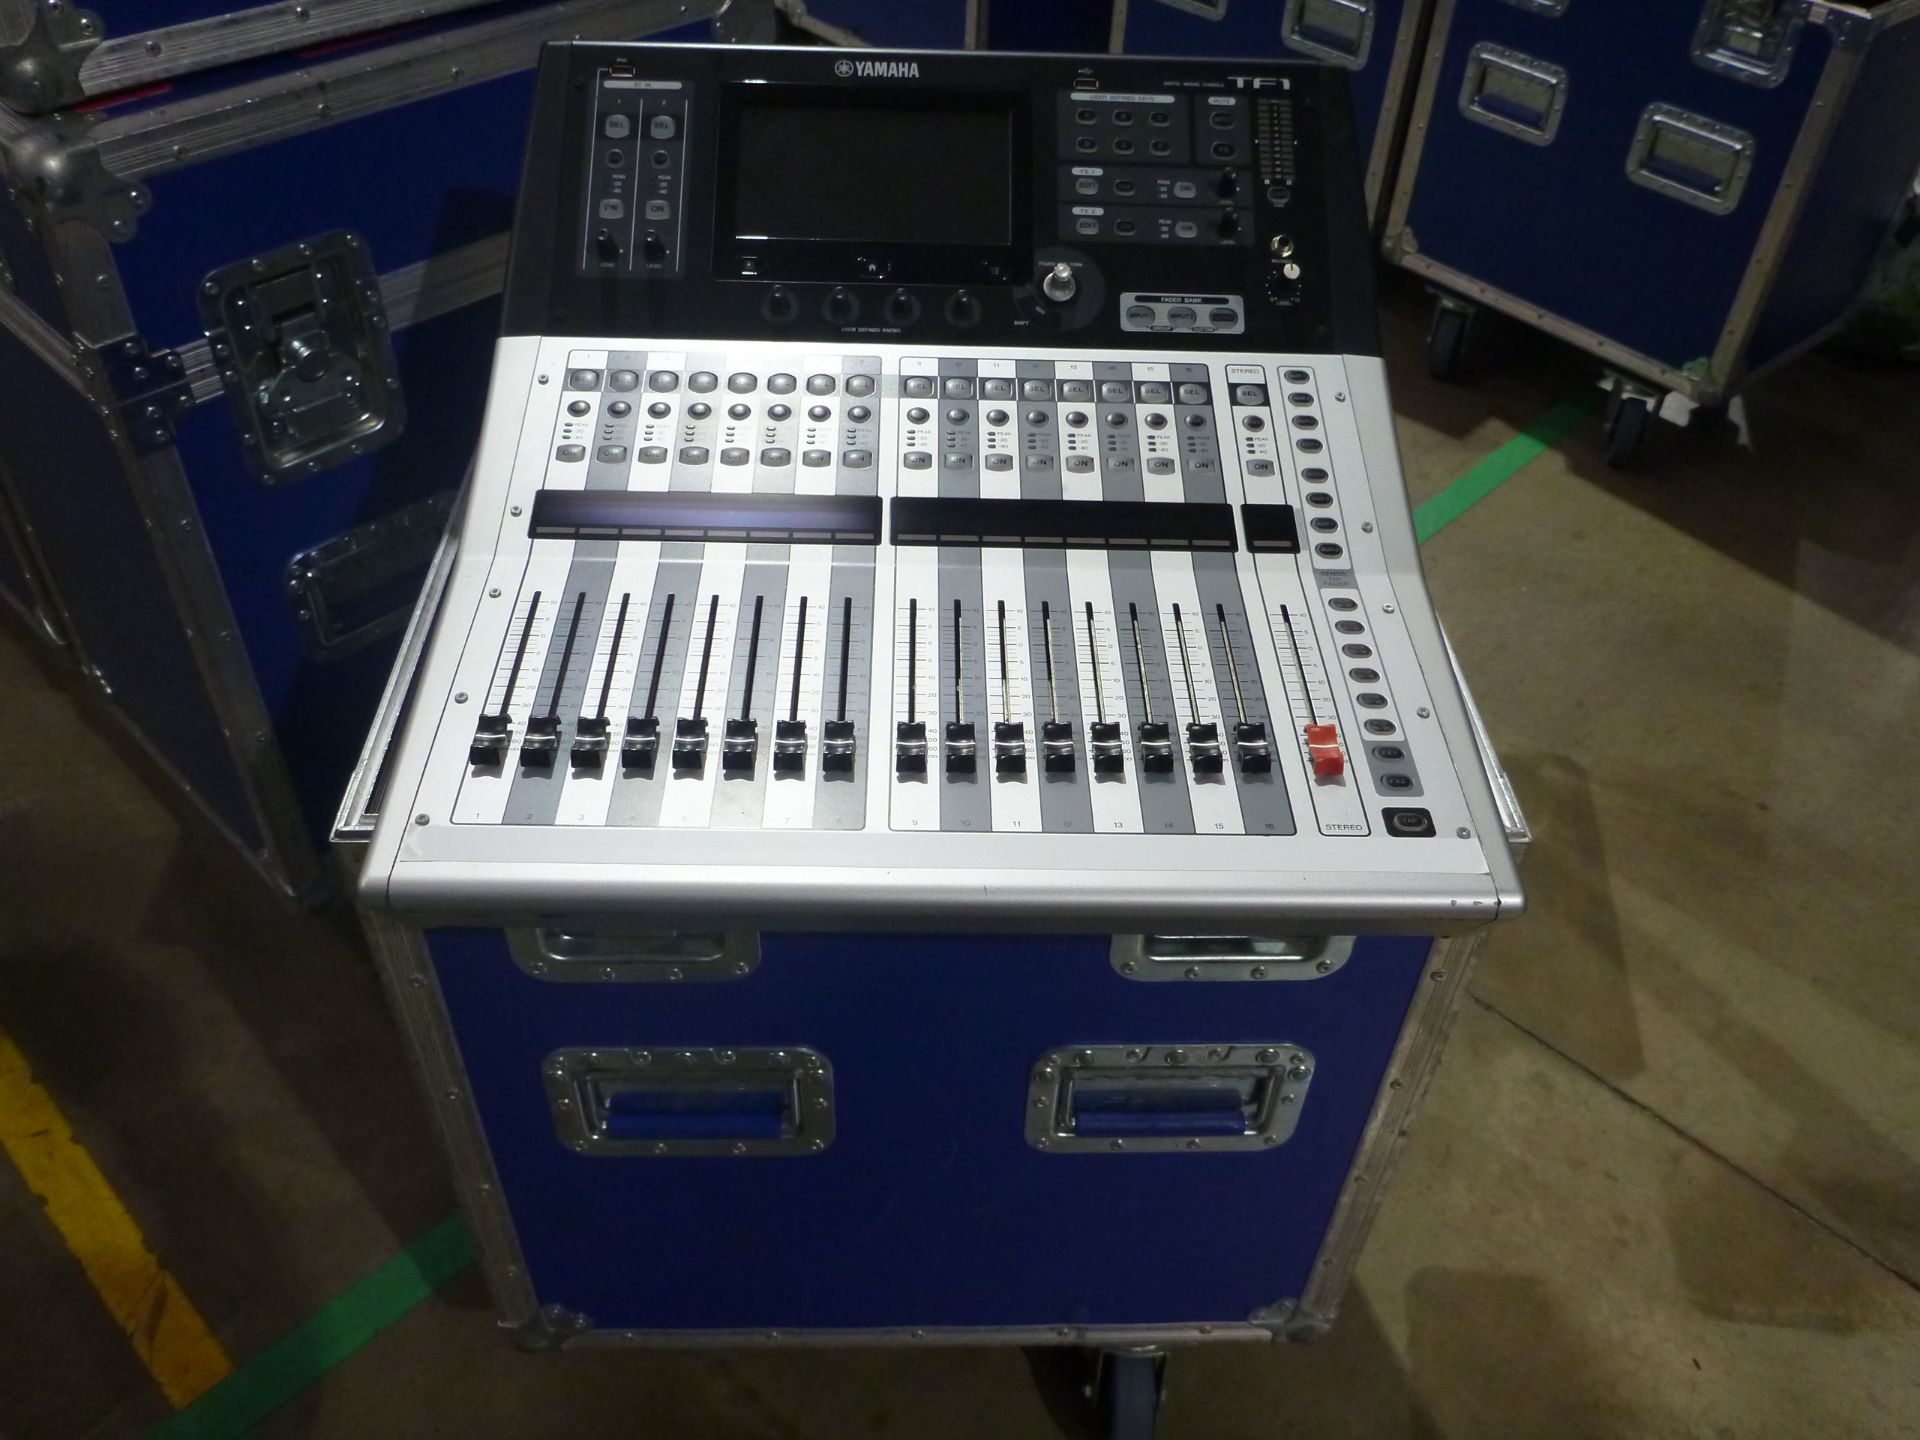 Yamaha TF1 32 Channel Digital Audio Mixing Desk, S/N BCVL01048, In flight case with power supply